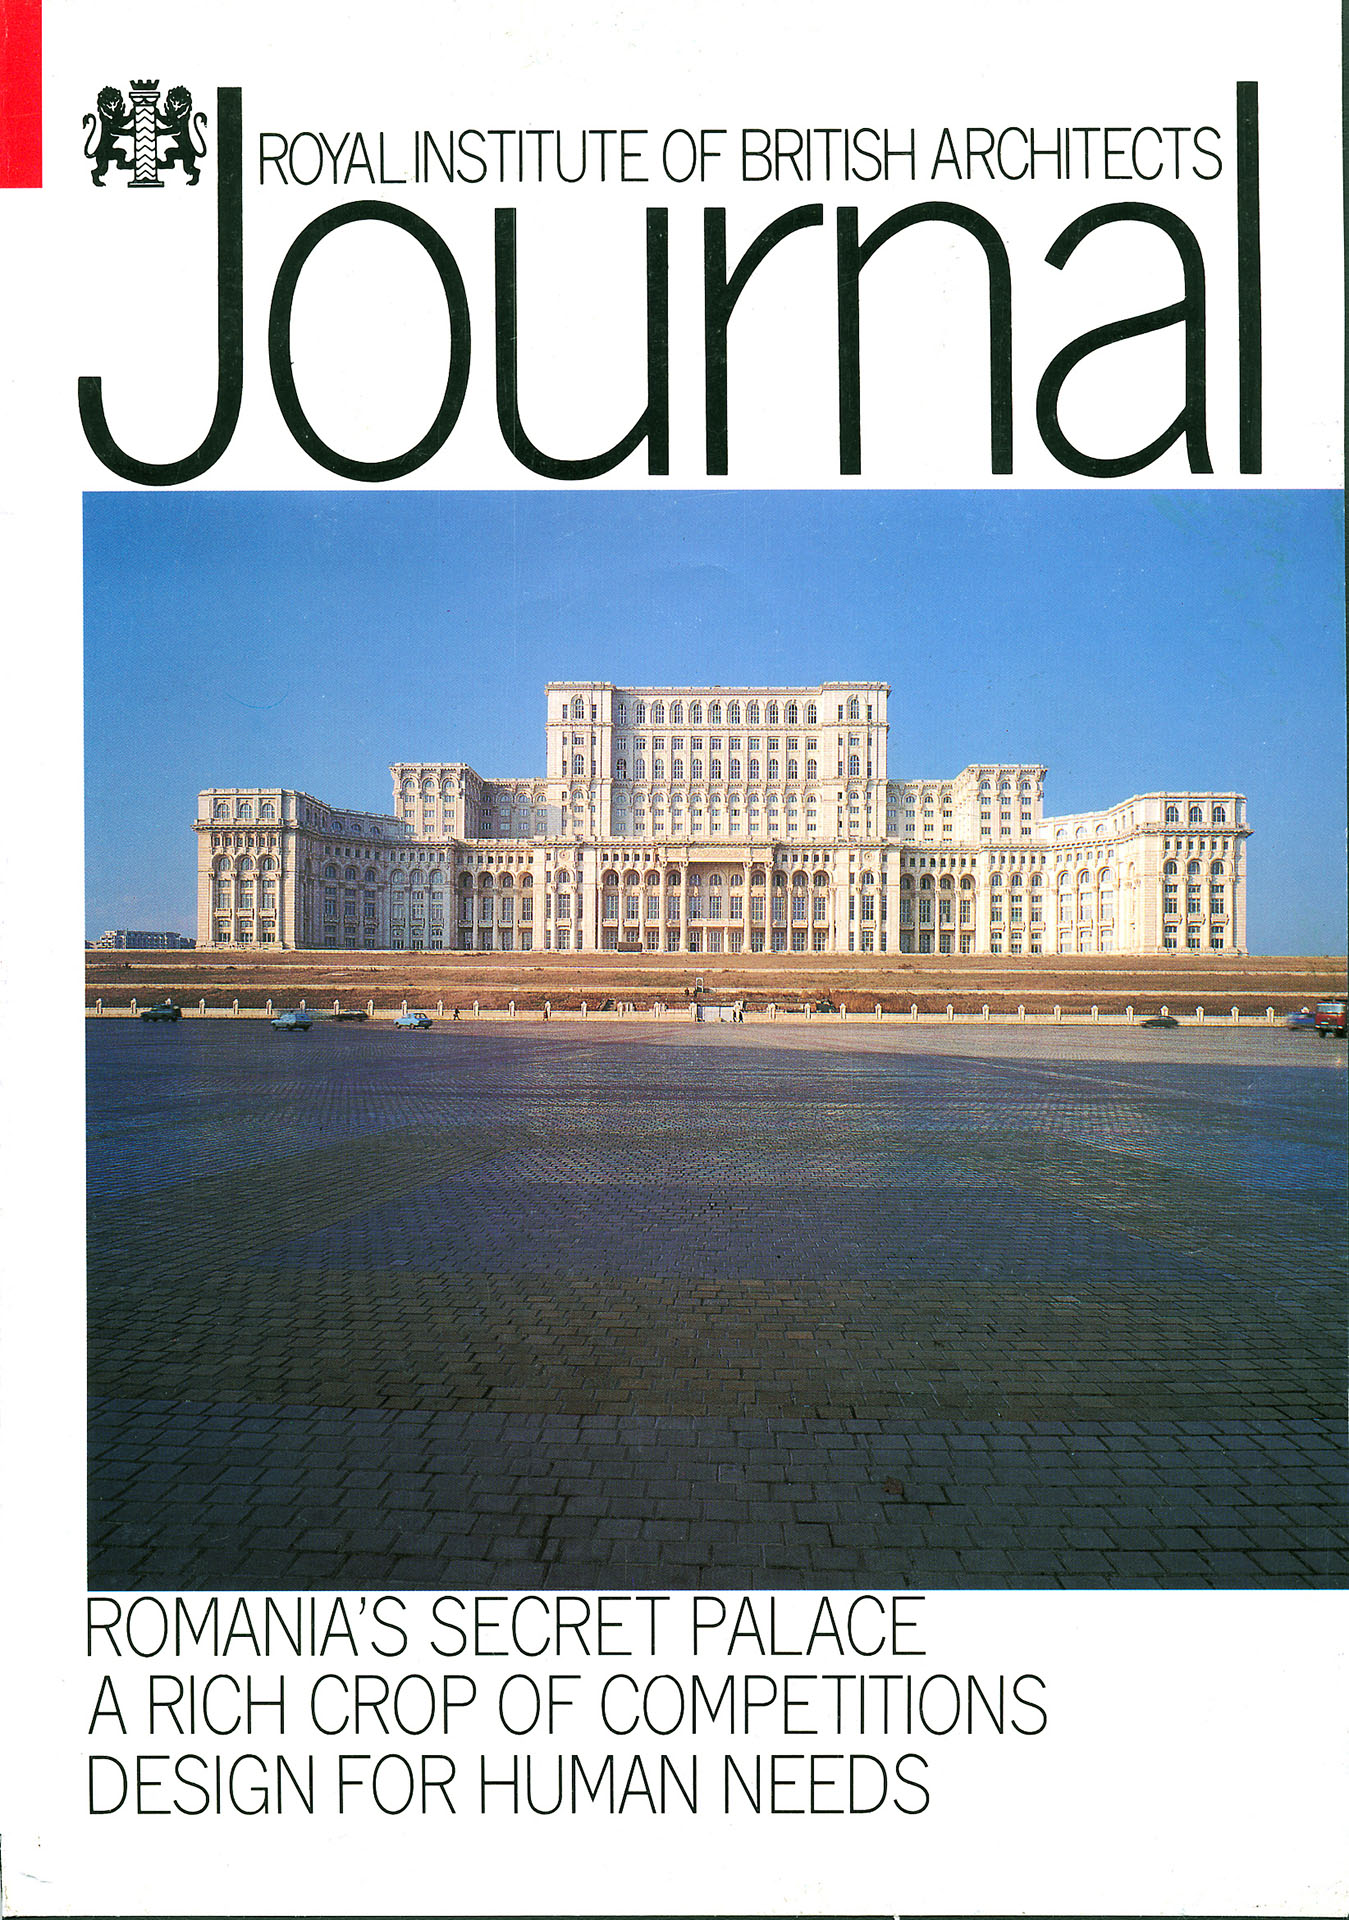 RIBA Journal cover story on The House of the People Romania